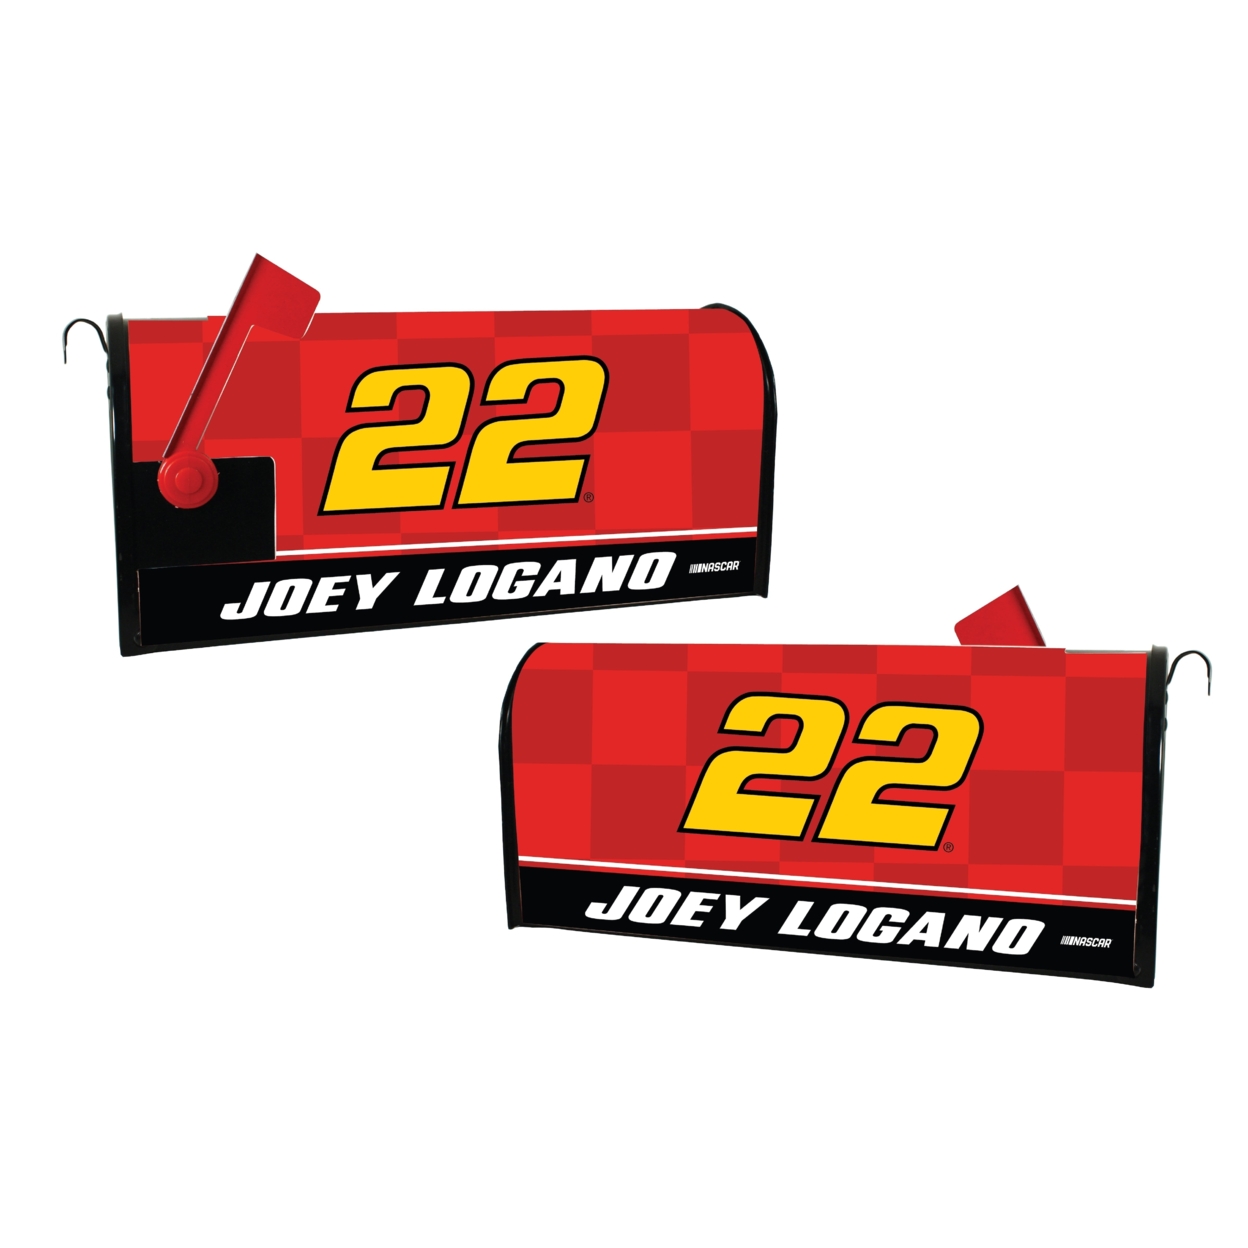 Nascar #22 Joey Logano Mailbox Cover Number Design New For 2022